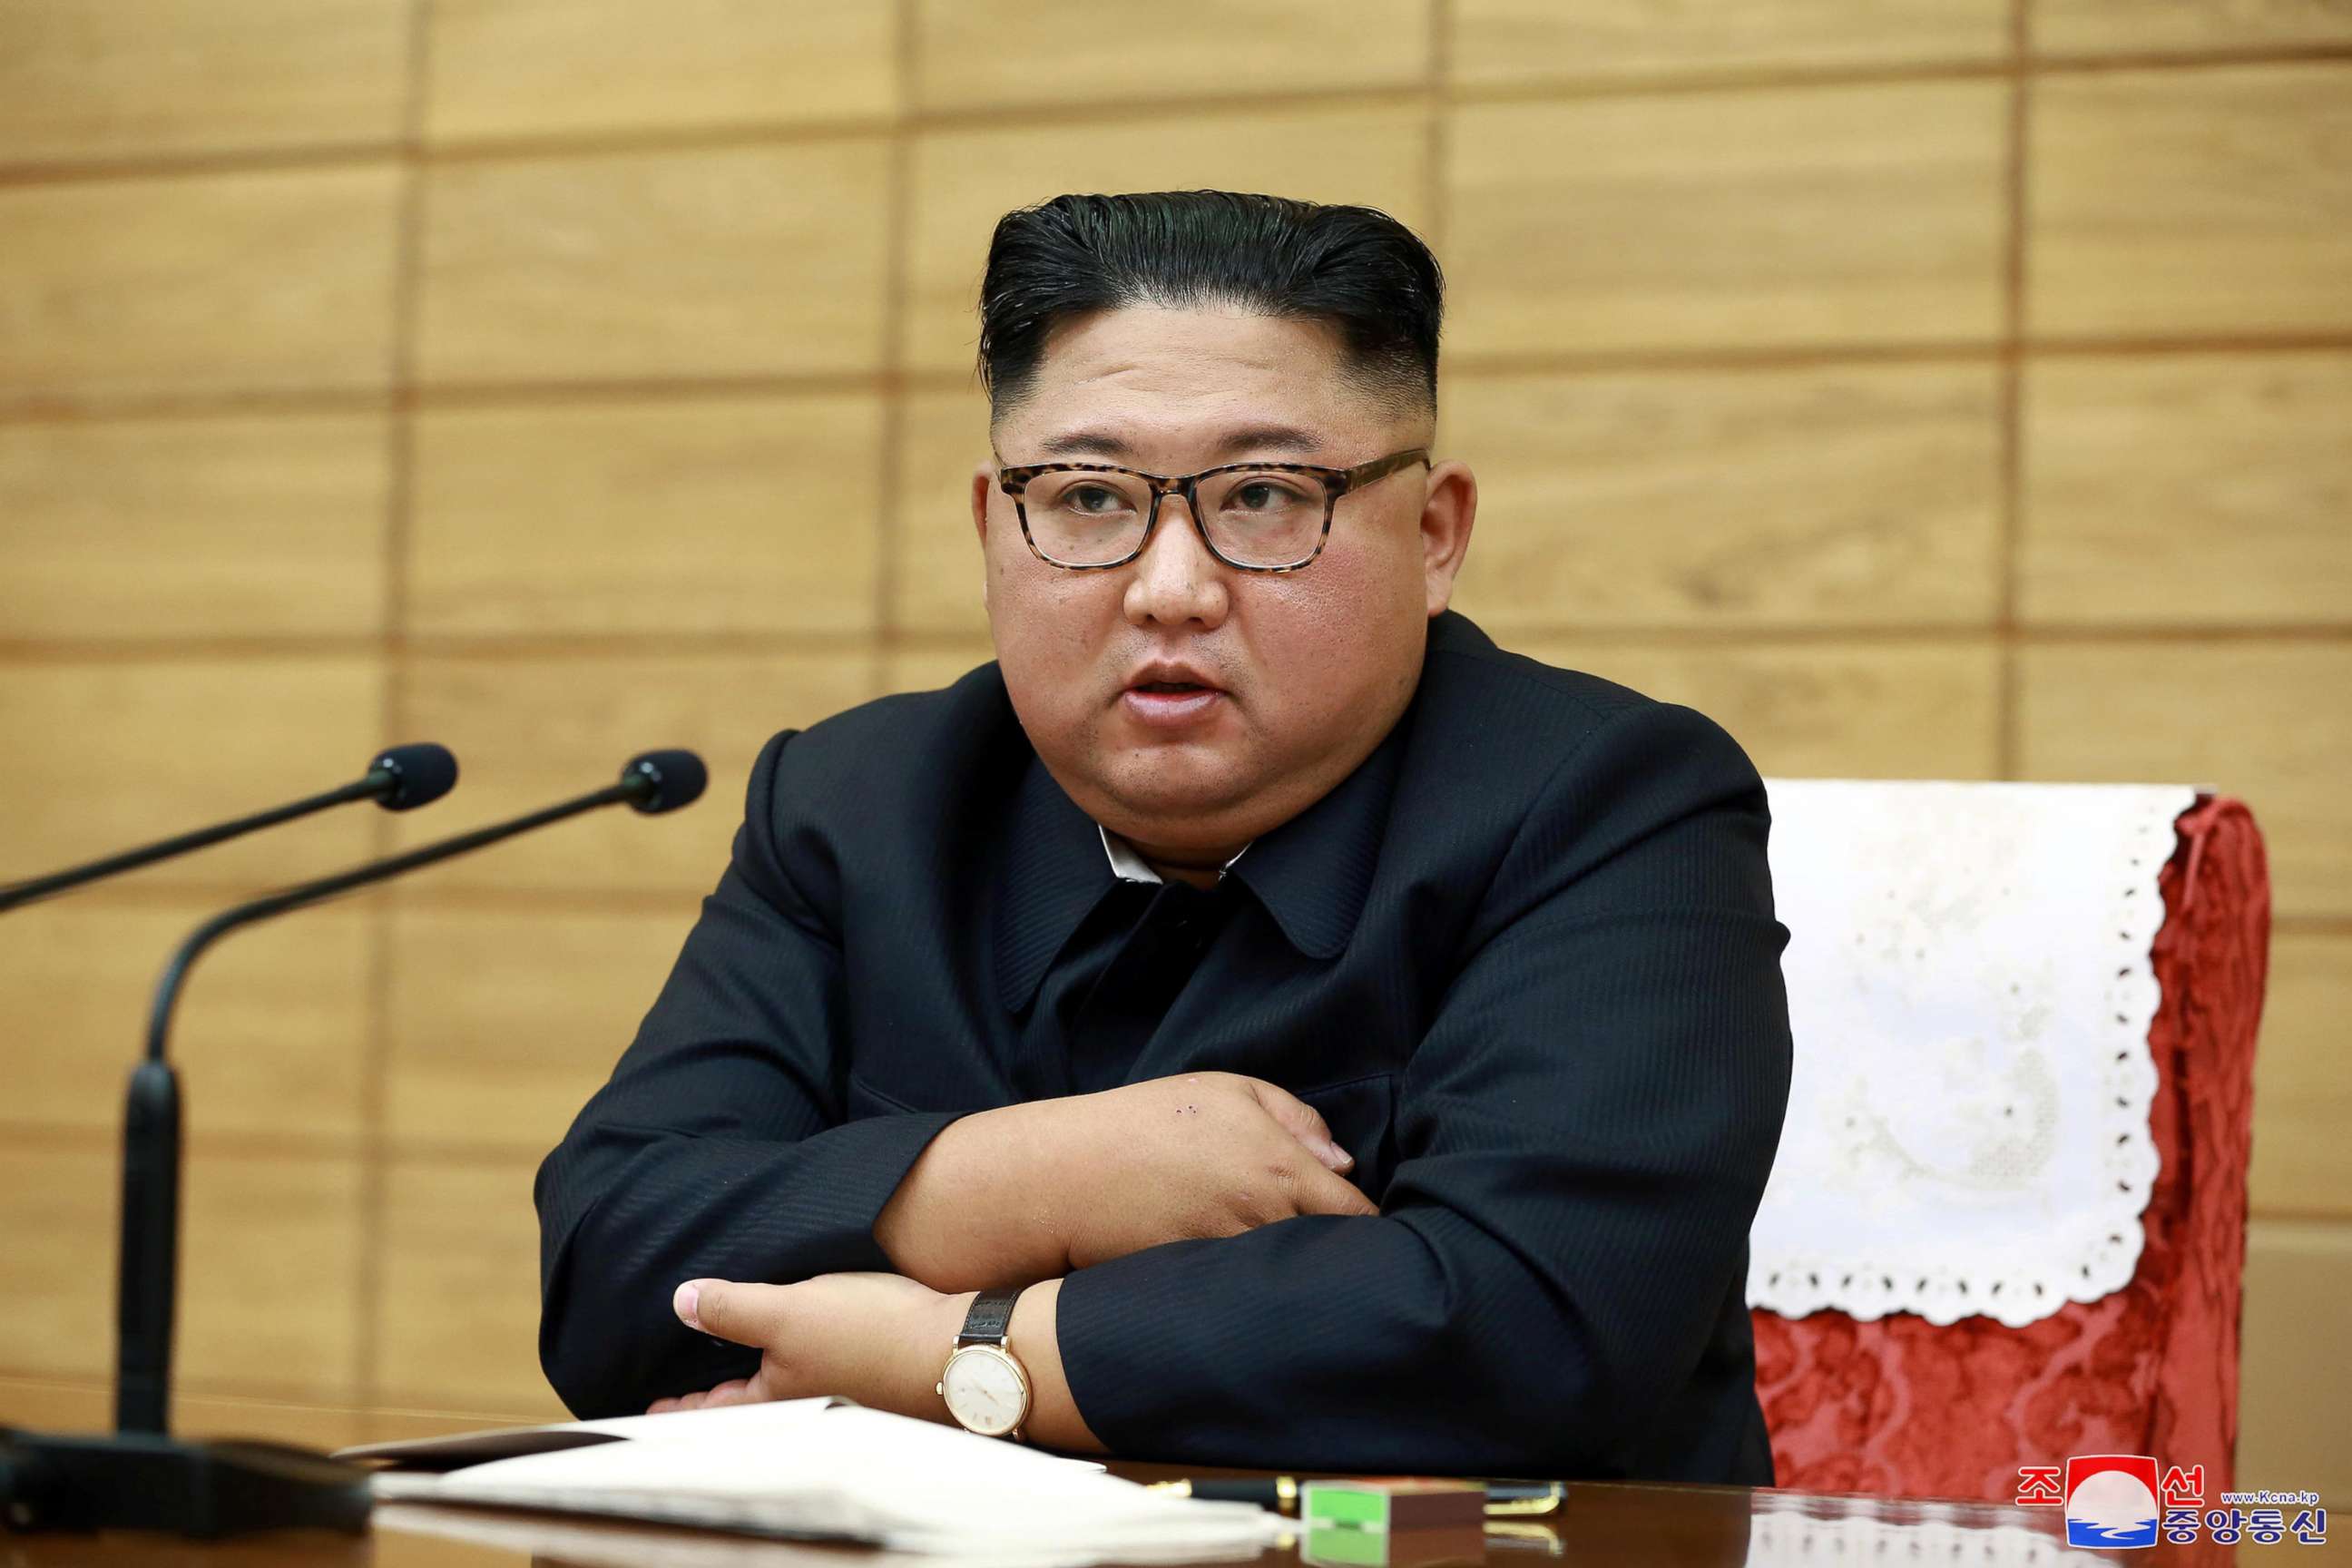 PHOTO: Kim Jong Un attends the Emergency Convocation of the Central Military Committee Emergency Expansion Meeting of the Workers' Party of North Korea in this undated photo released Sept. 6, 2019, by North Korea's Korean Central News Agency.
